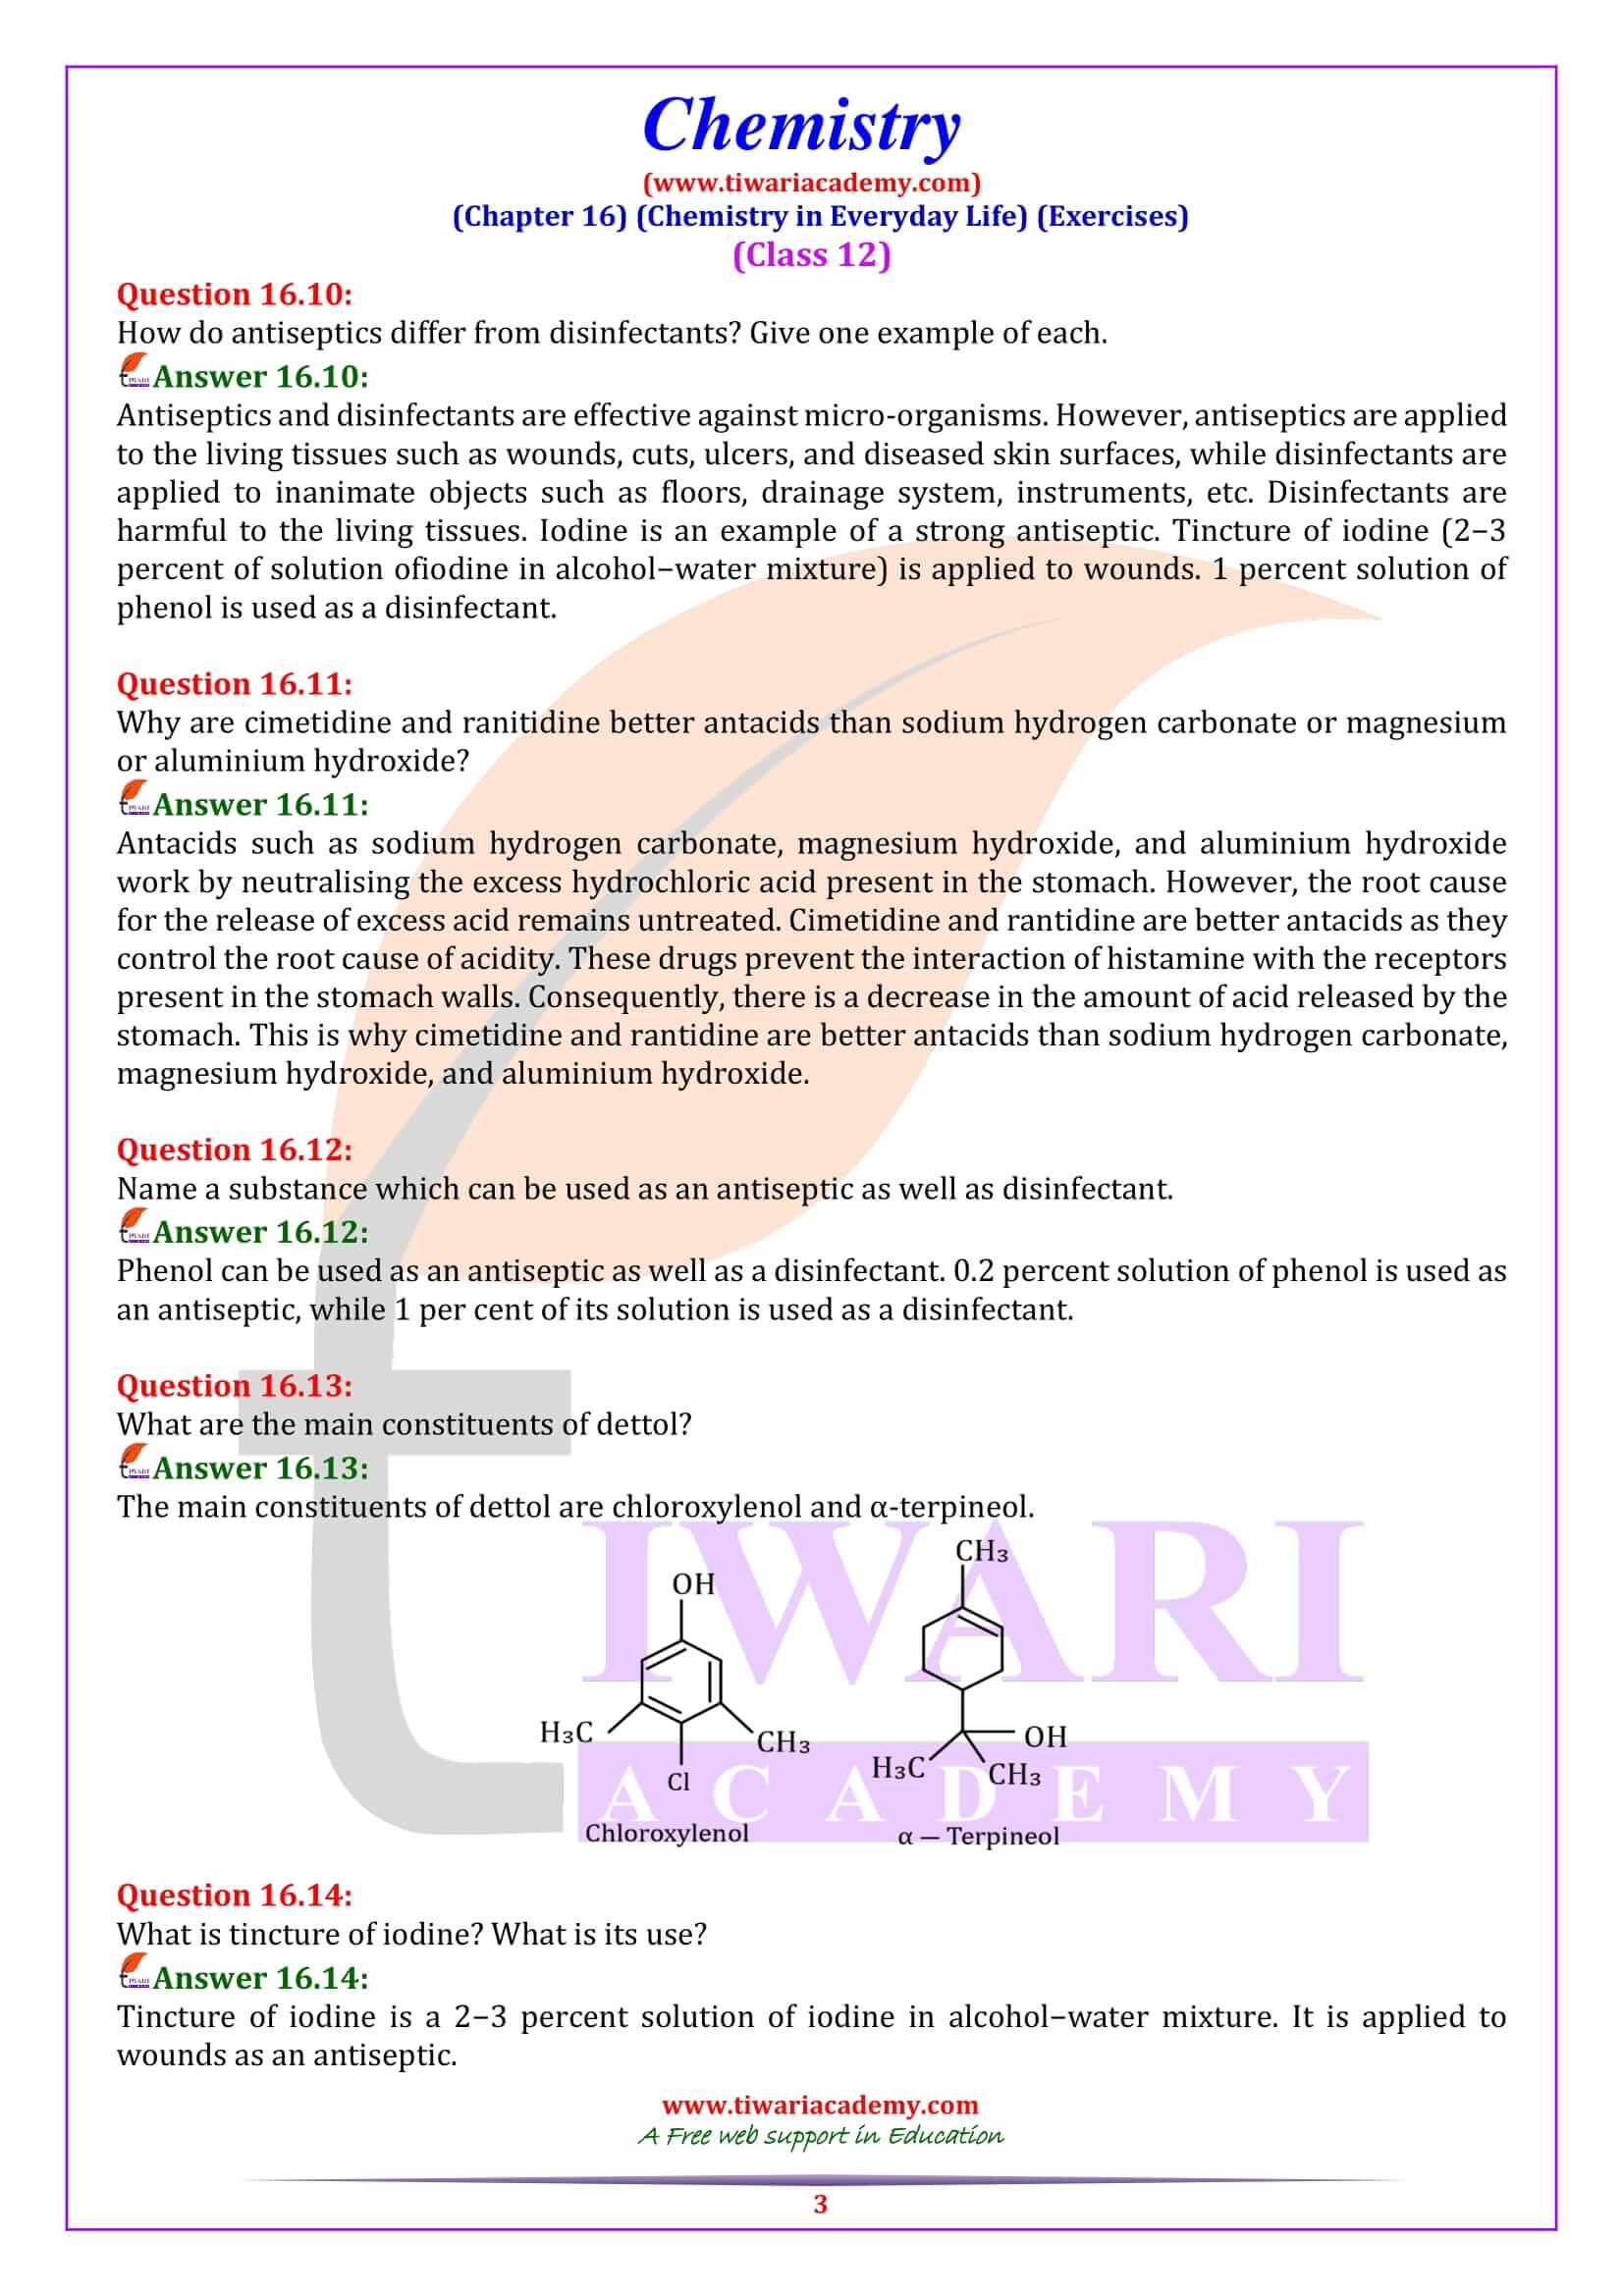 Class 12 Chemistry Chapter 16 Chemistry in Everyday Life in English Medium